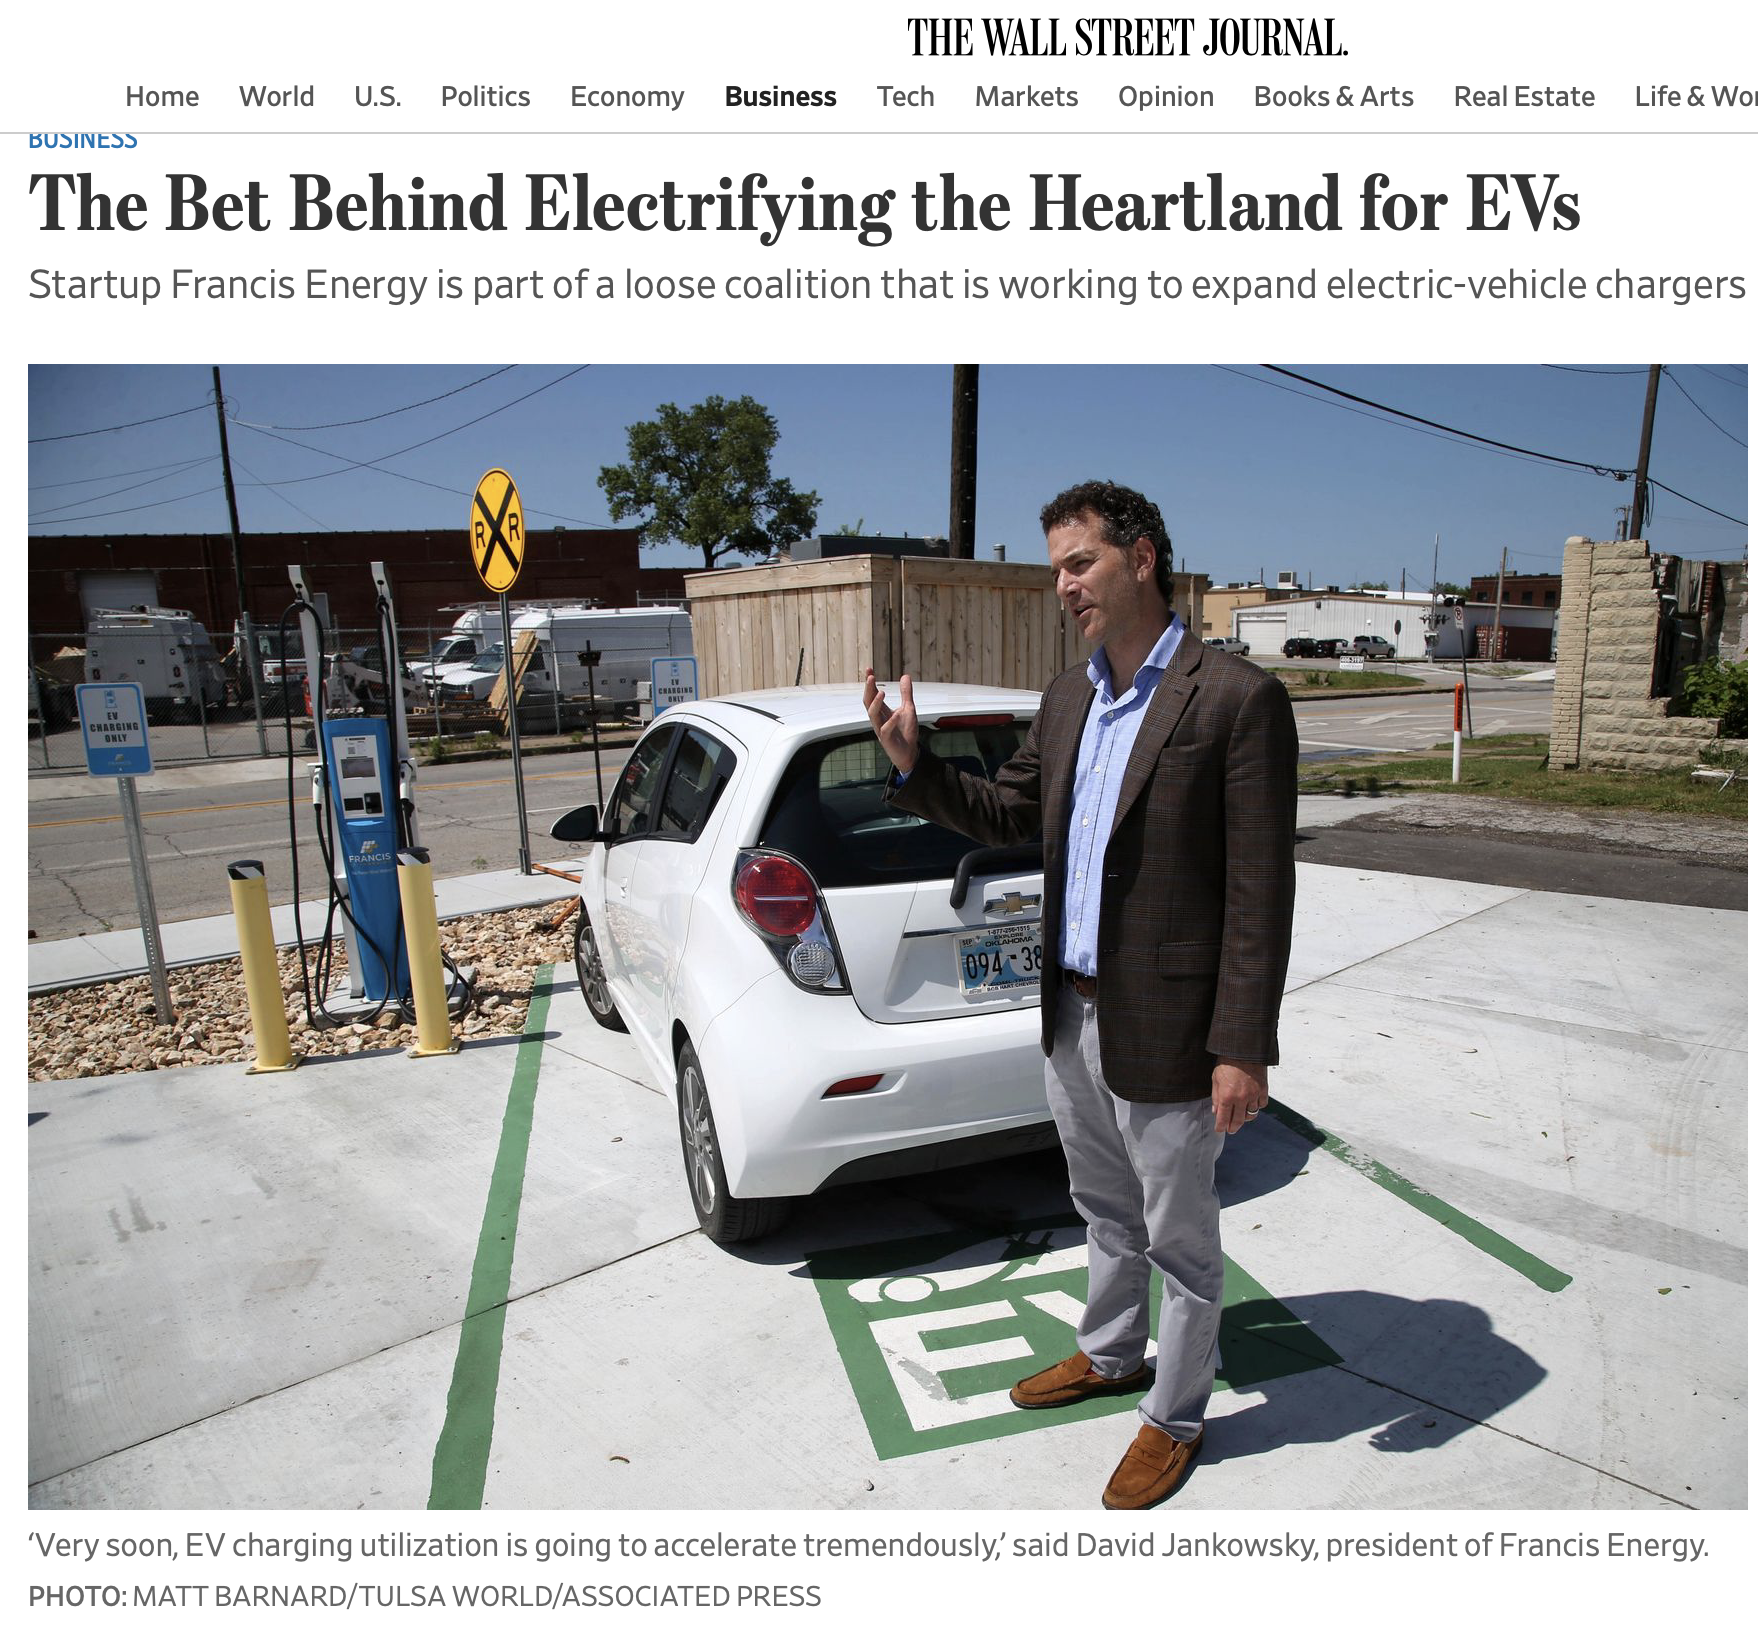 David Jankowsky with electric car and charging station